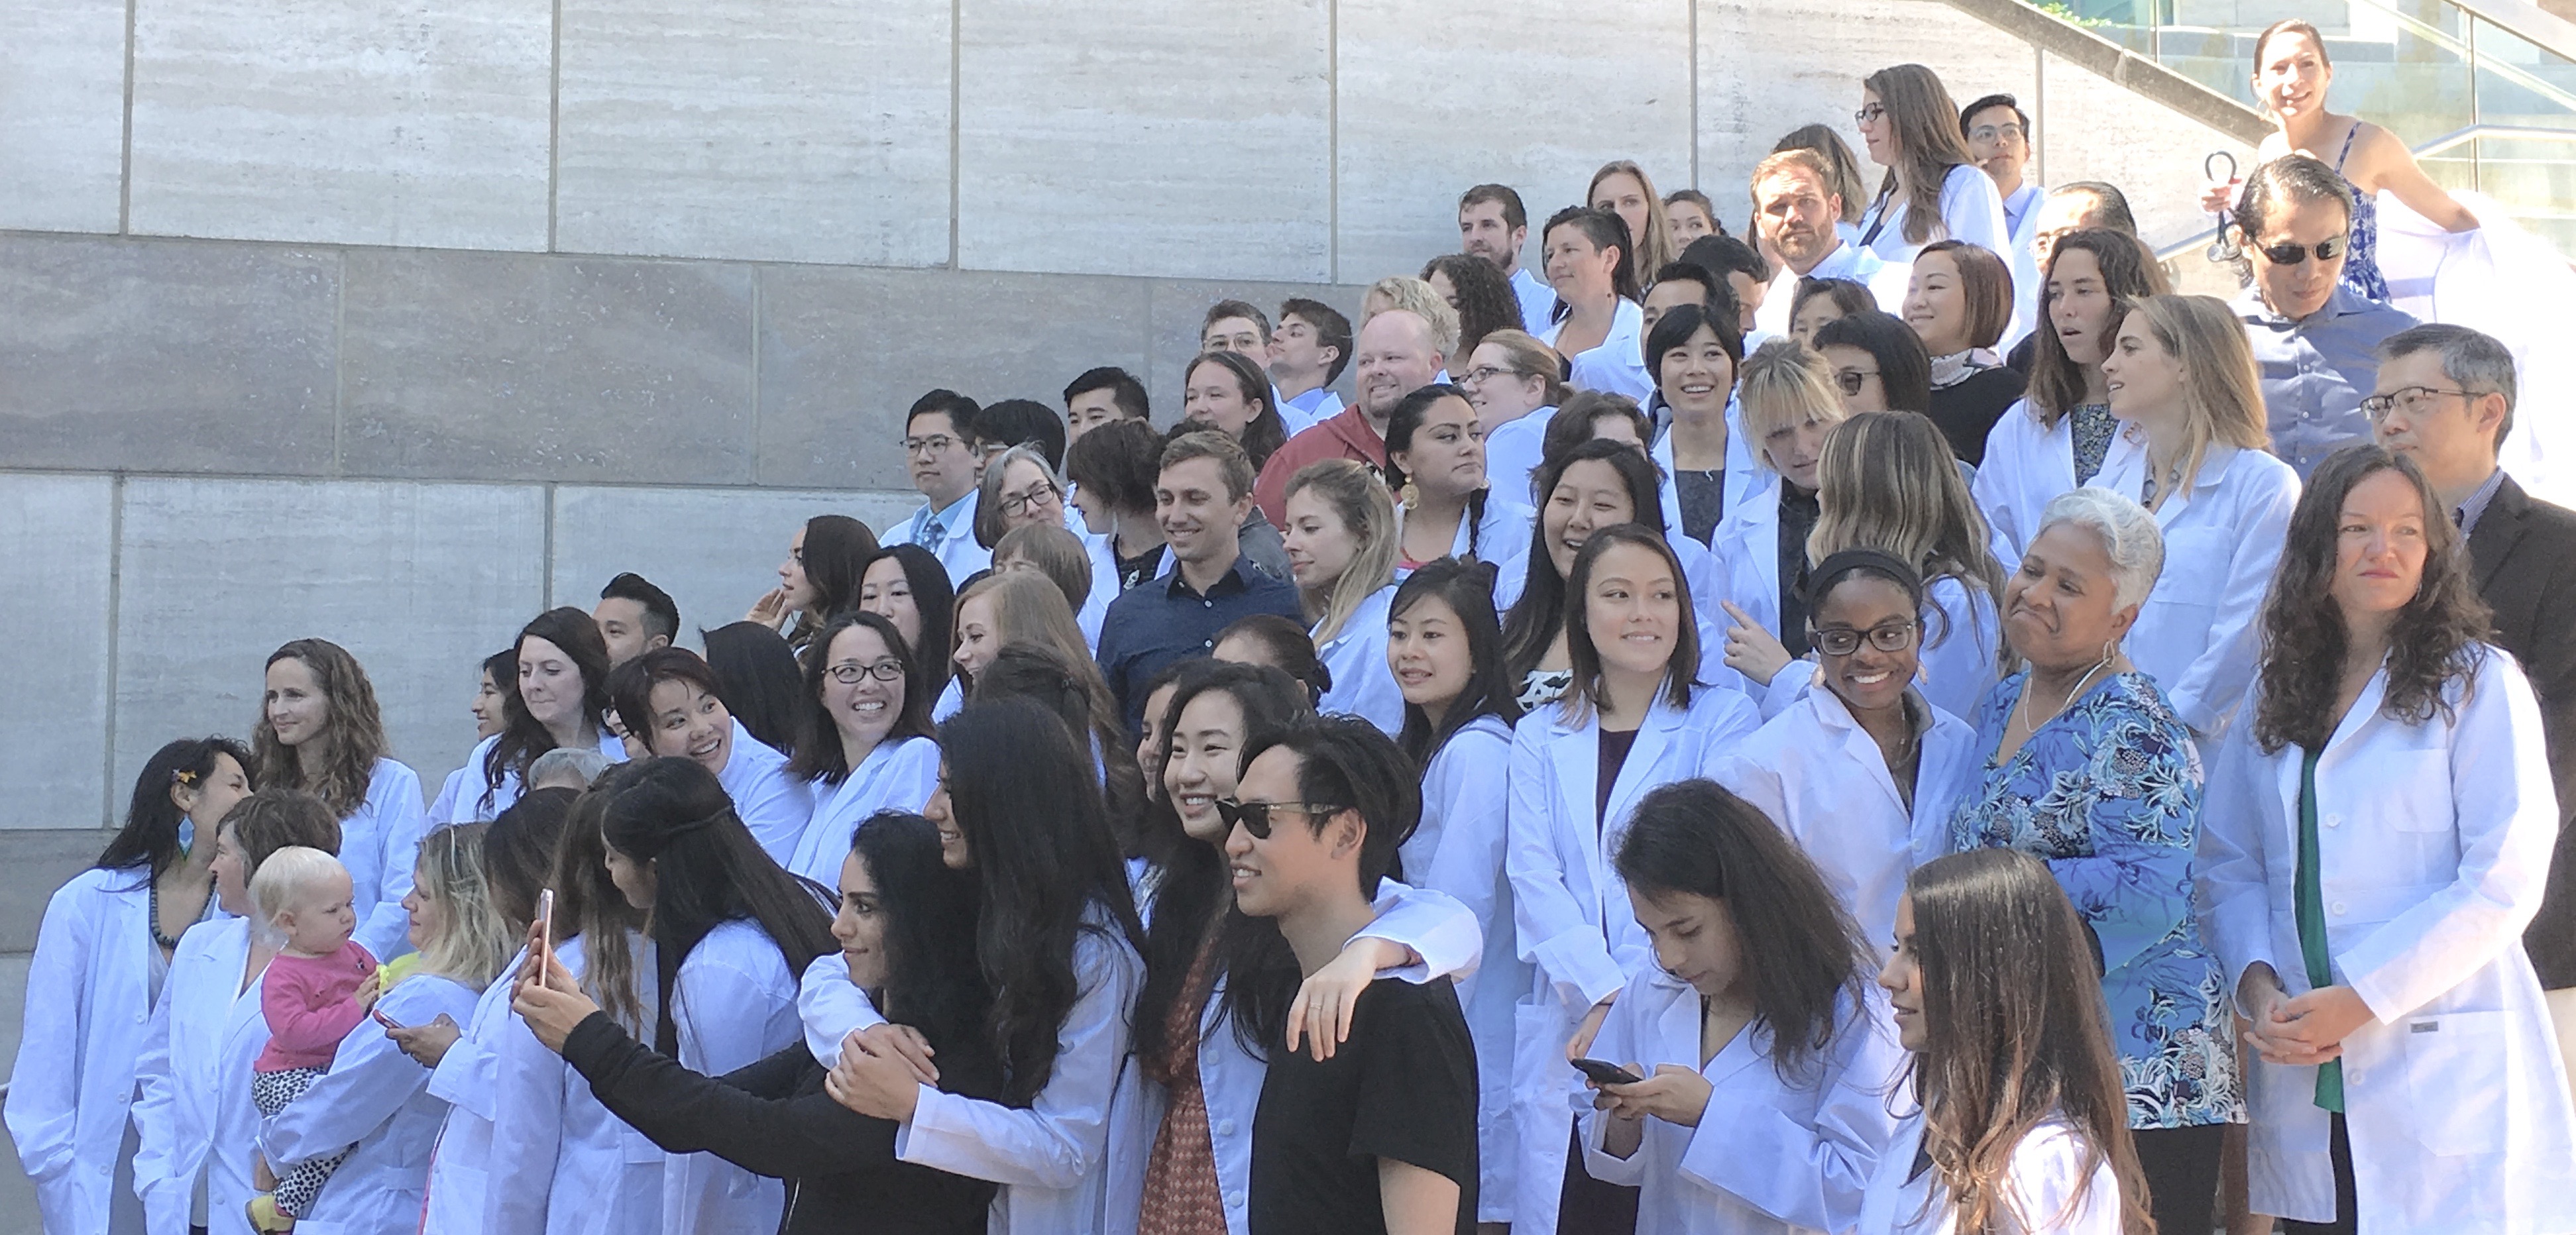 Family and friends join the MEPN students in their White Coat group photo